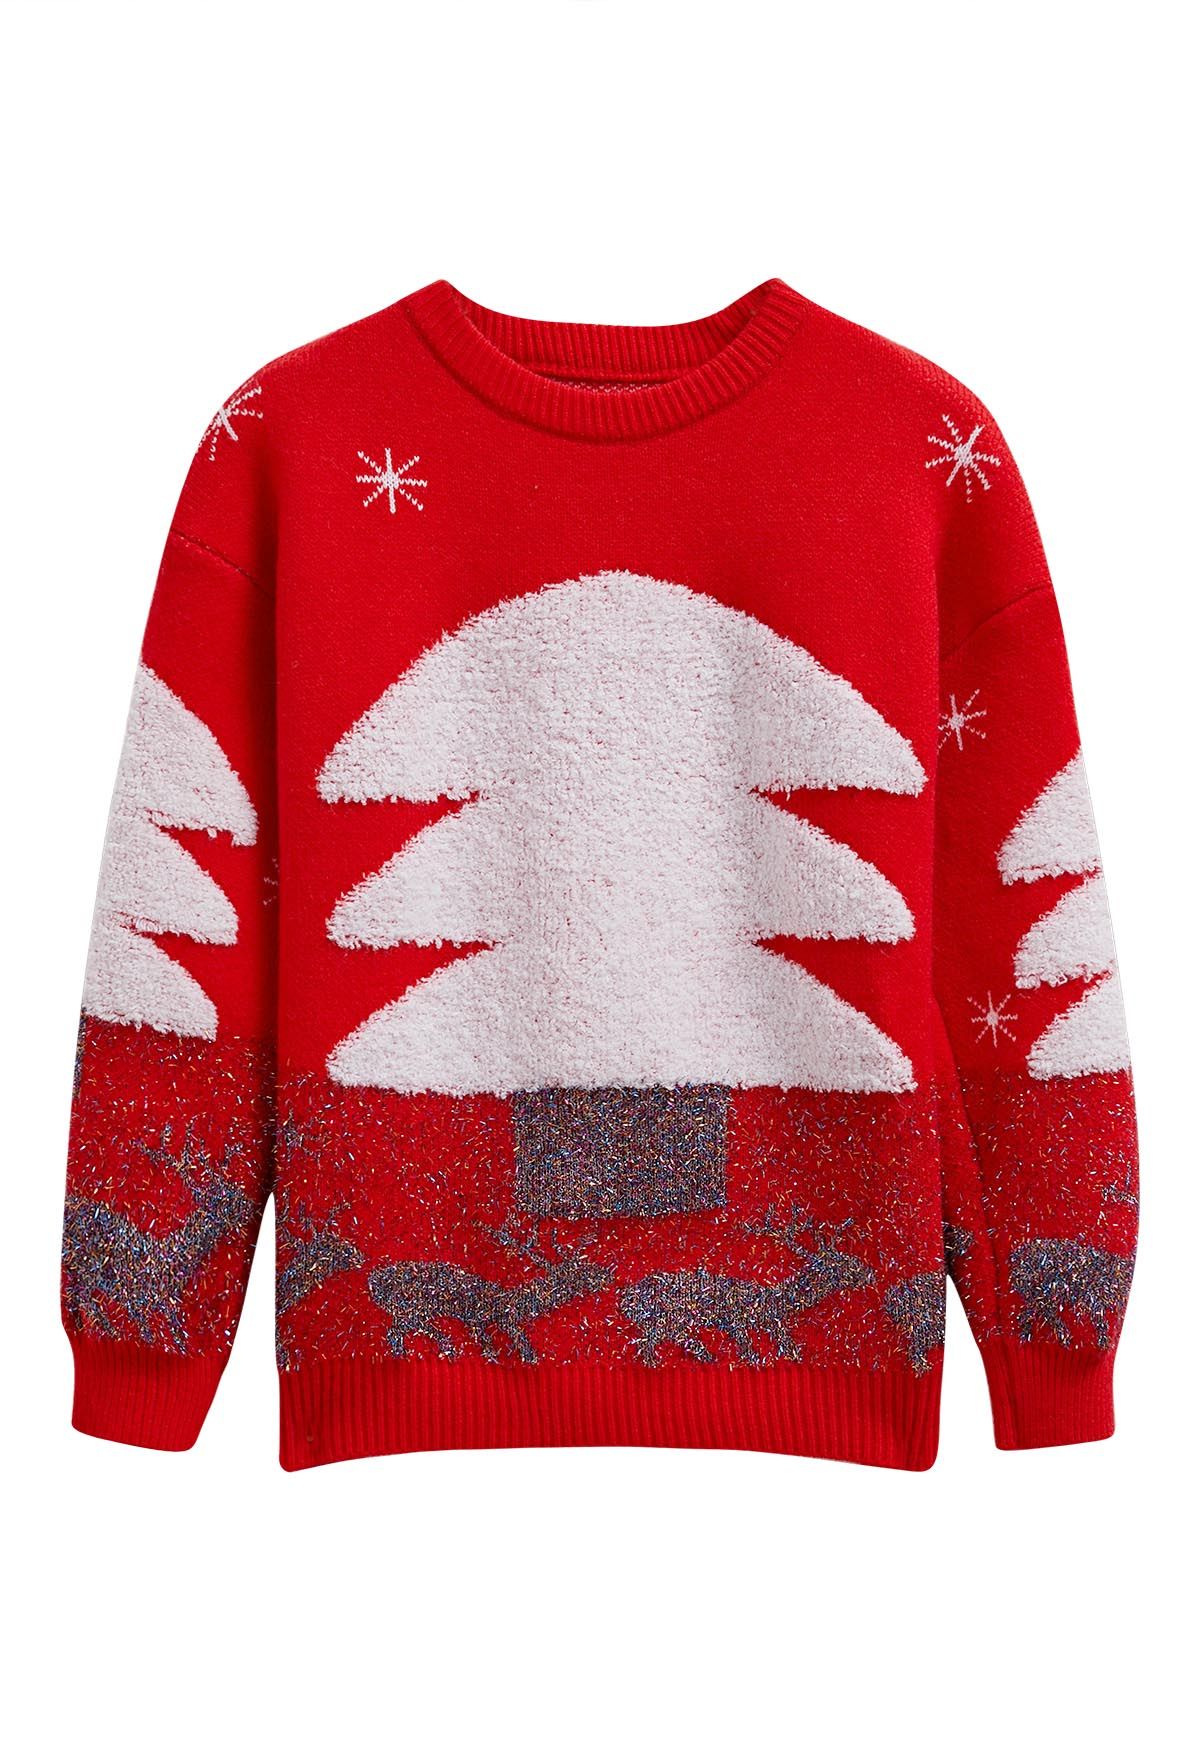 Joyful Christmas Tree and Elk Jacquard Knit Sweater in Red